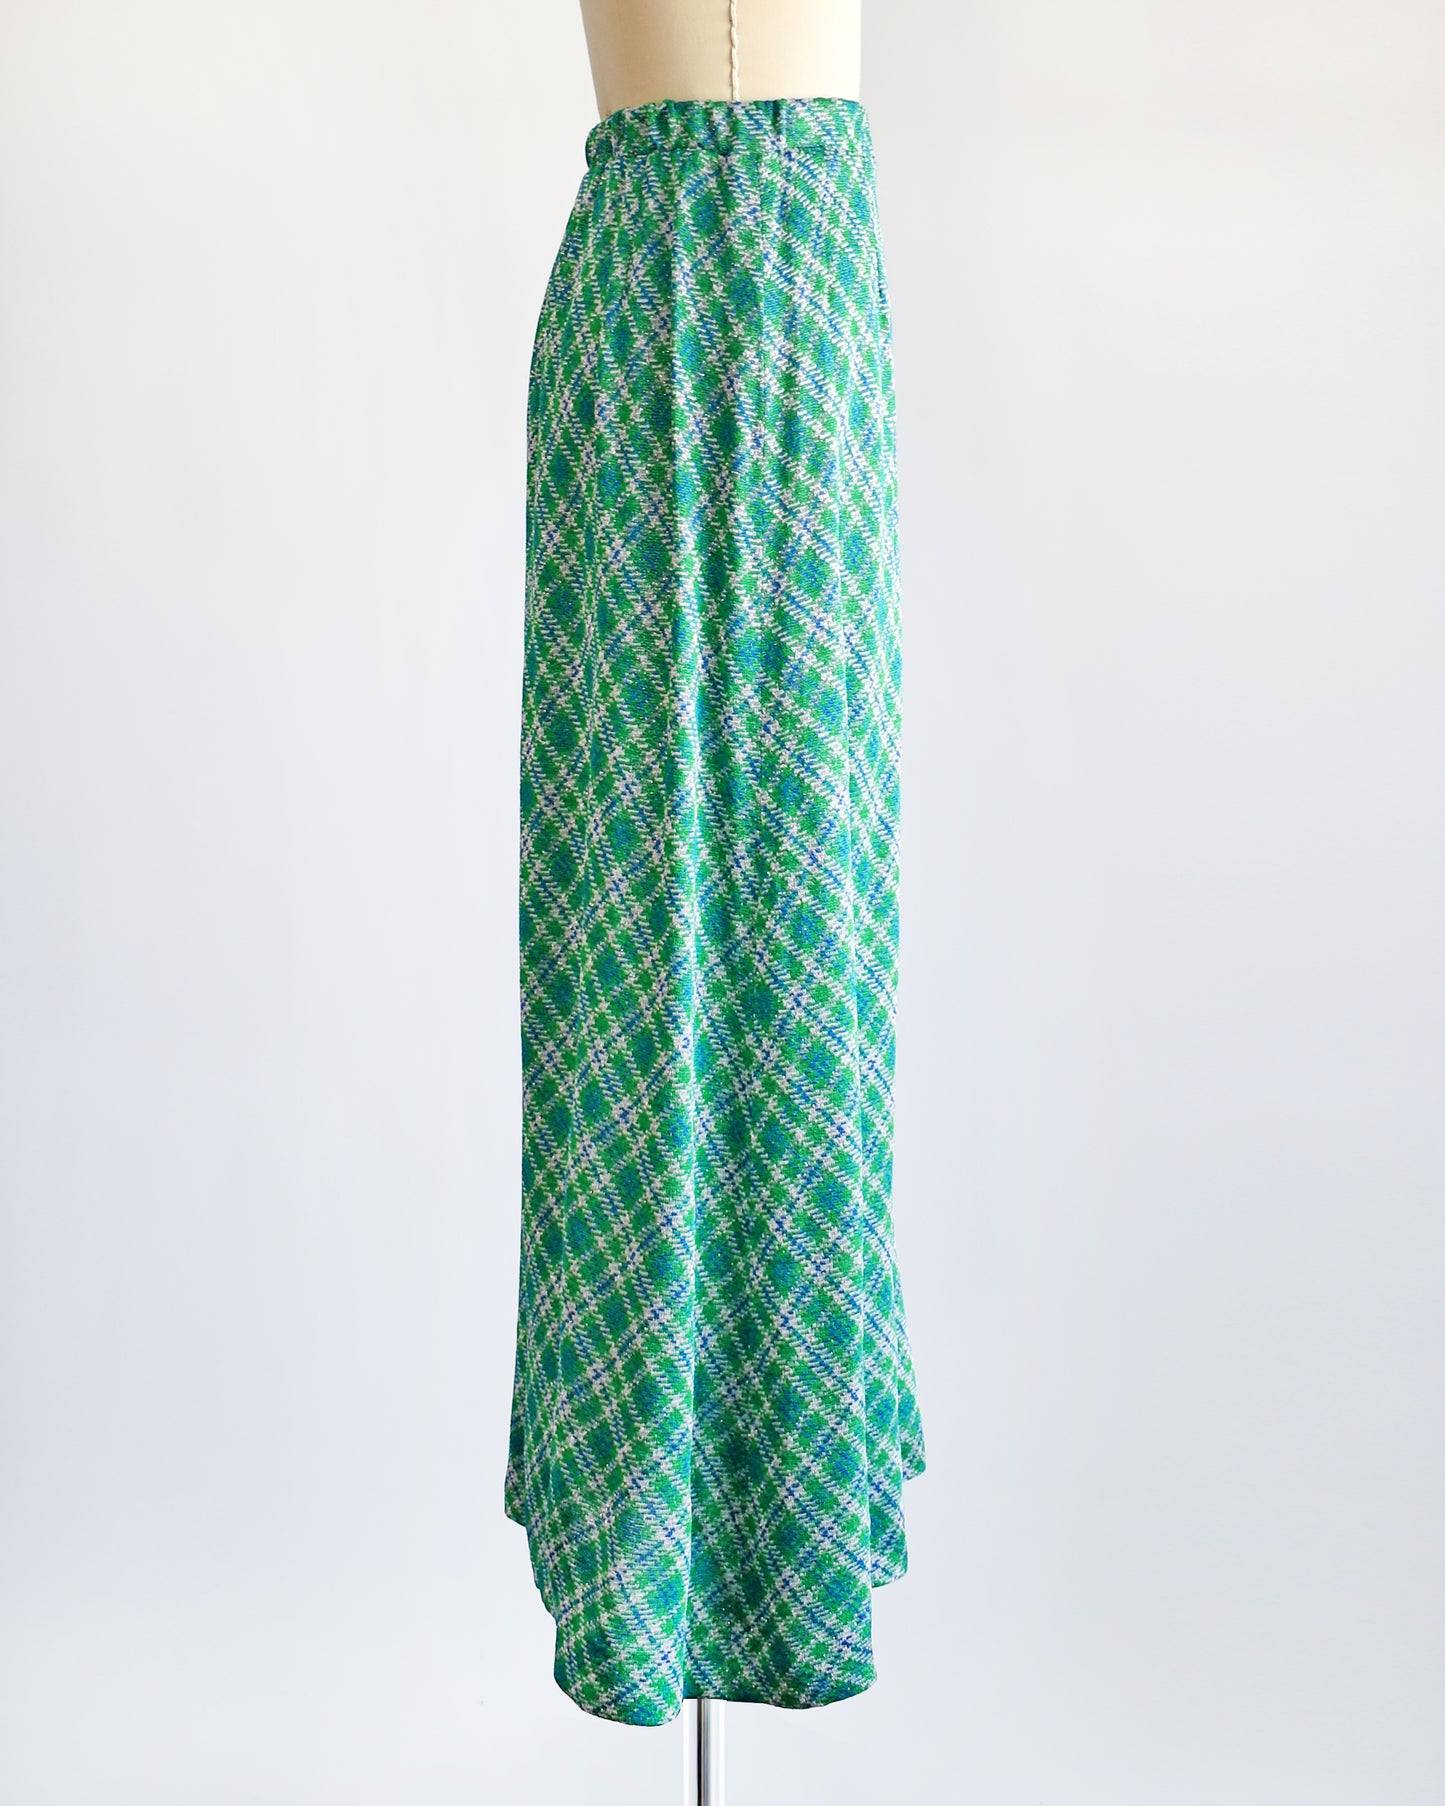 Side view of a vintage 1970s maxi skirt that features festive green, blue, and white plaid fabric with silver metallic threads.